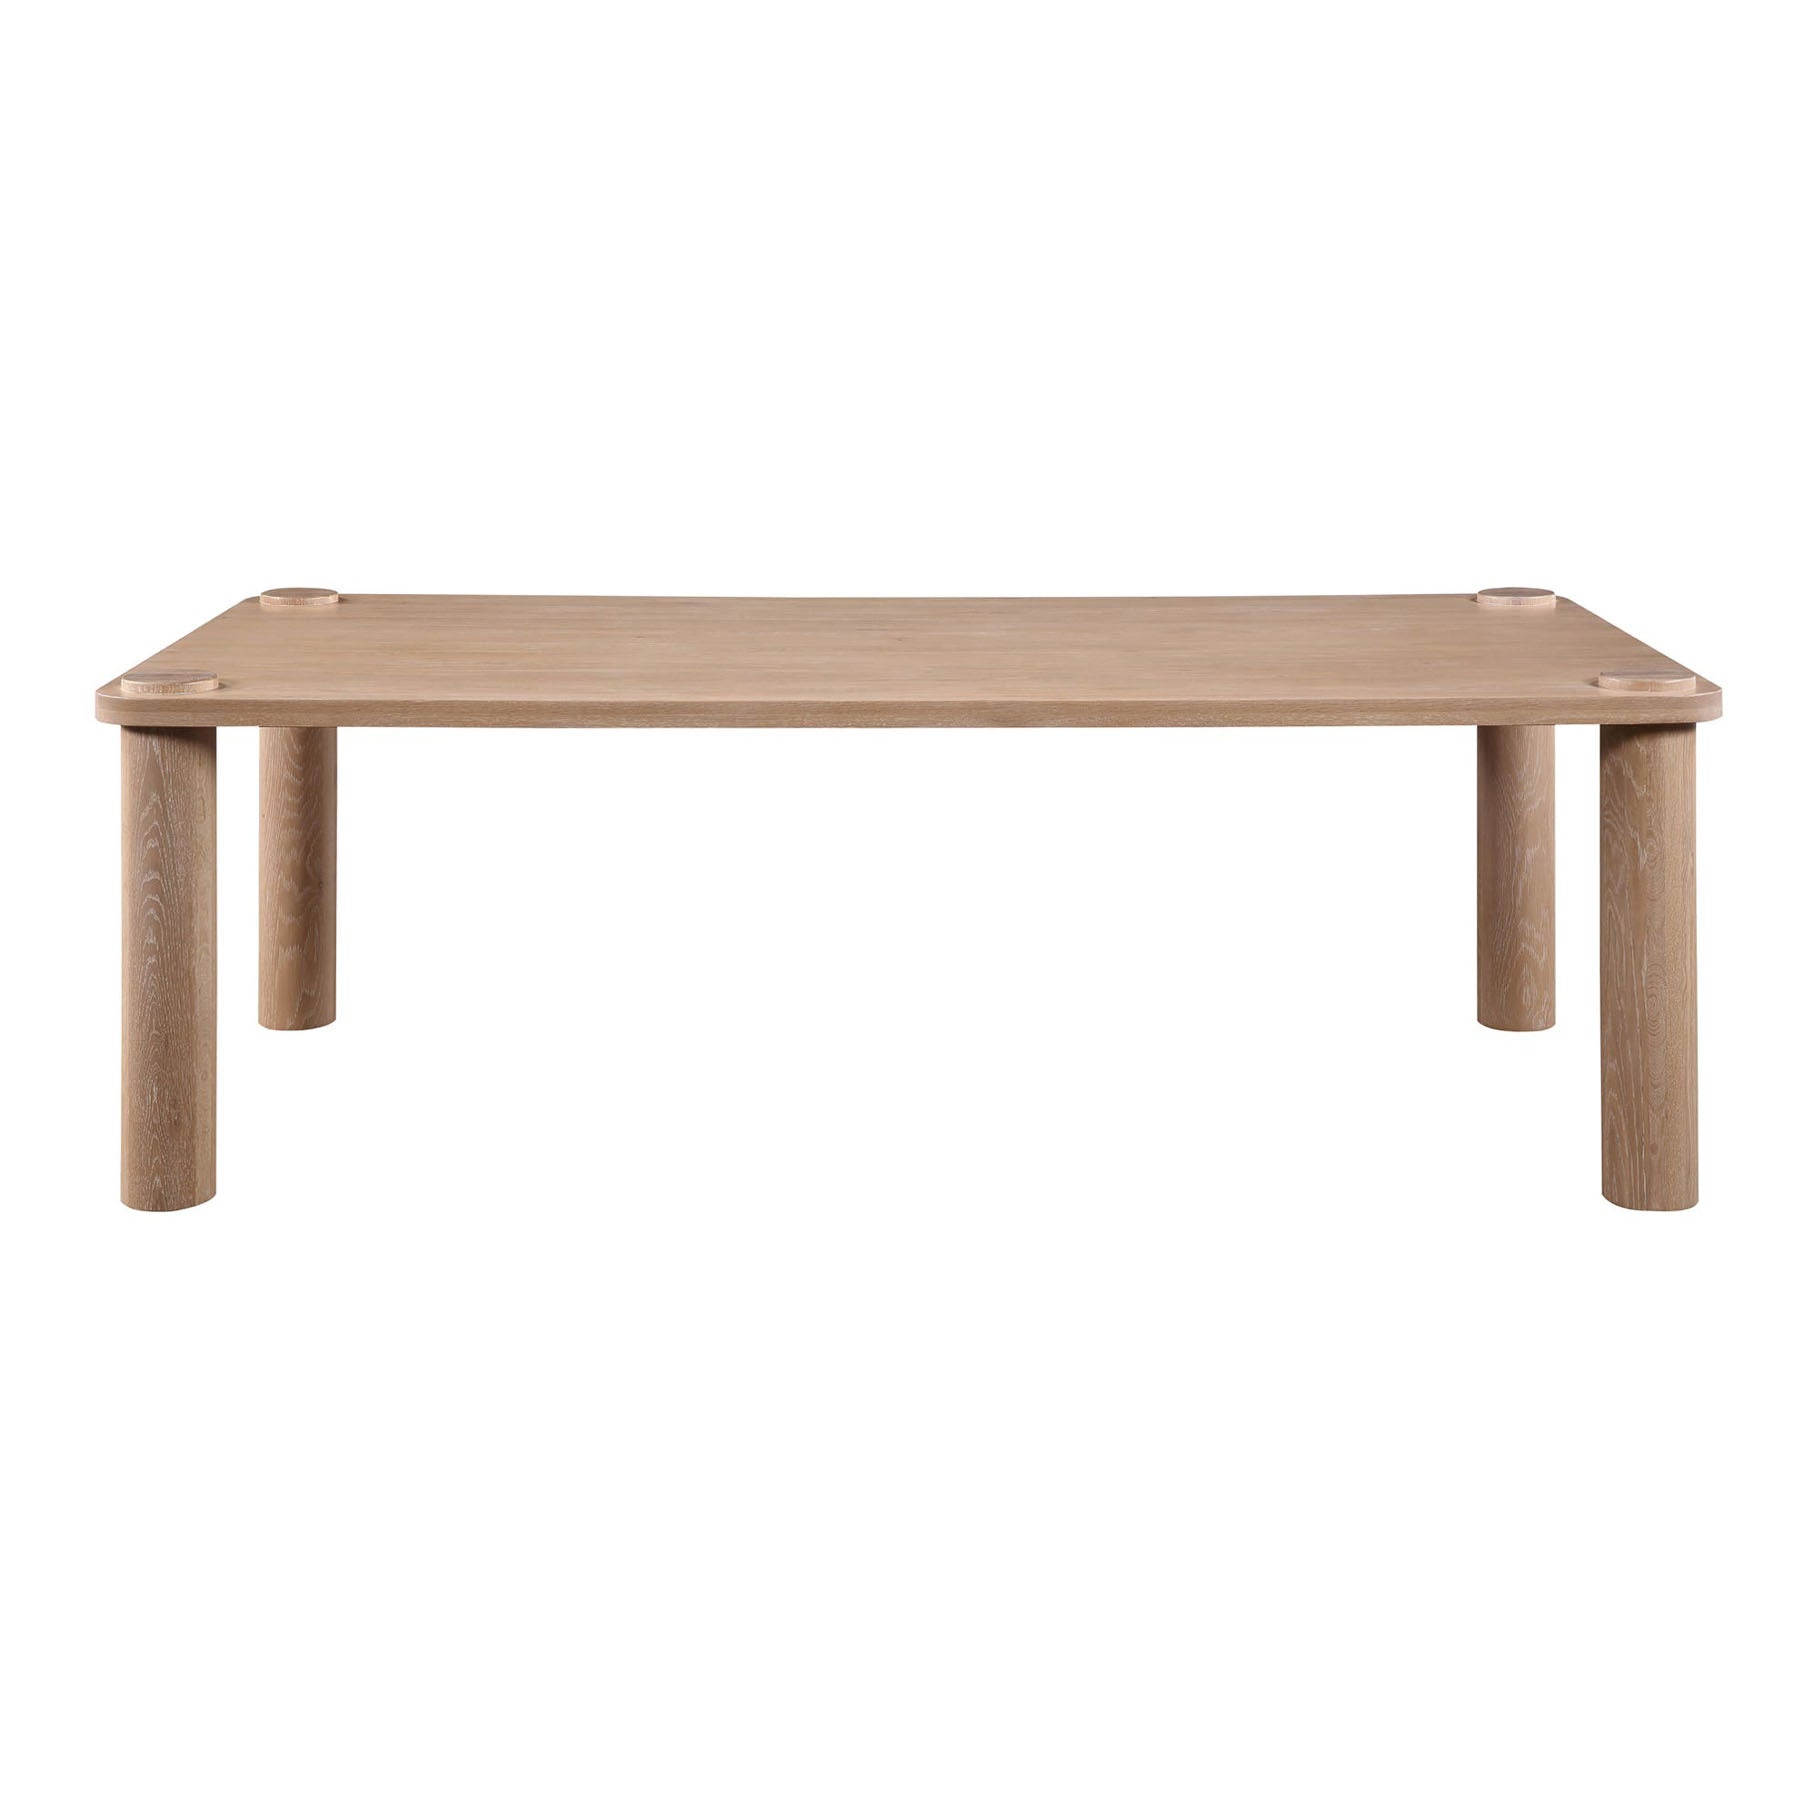 Sold white oak large dining table with seating for up to eight